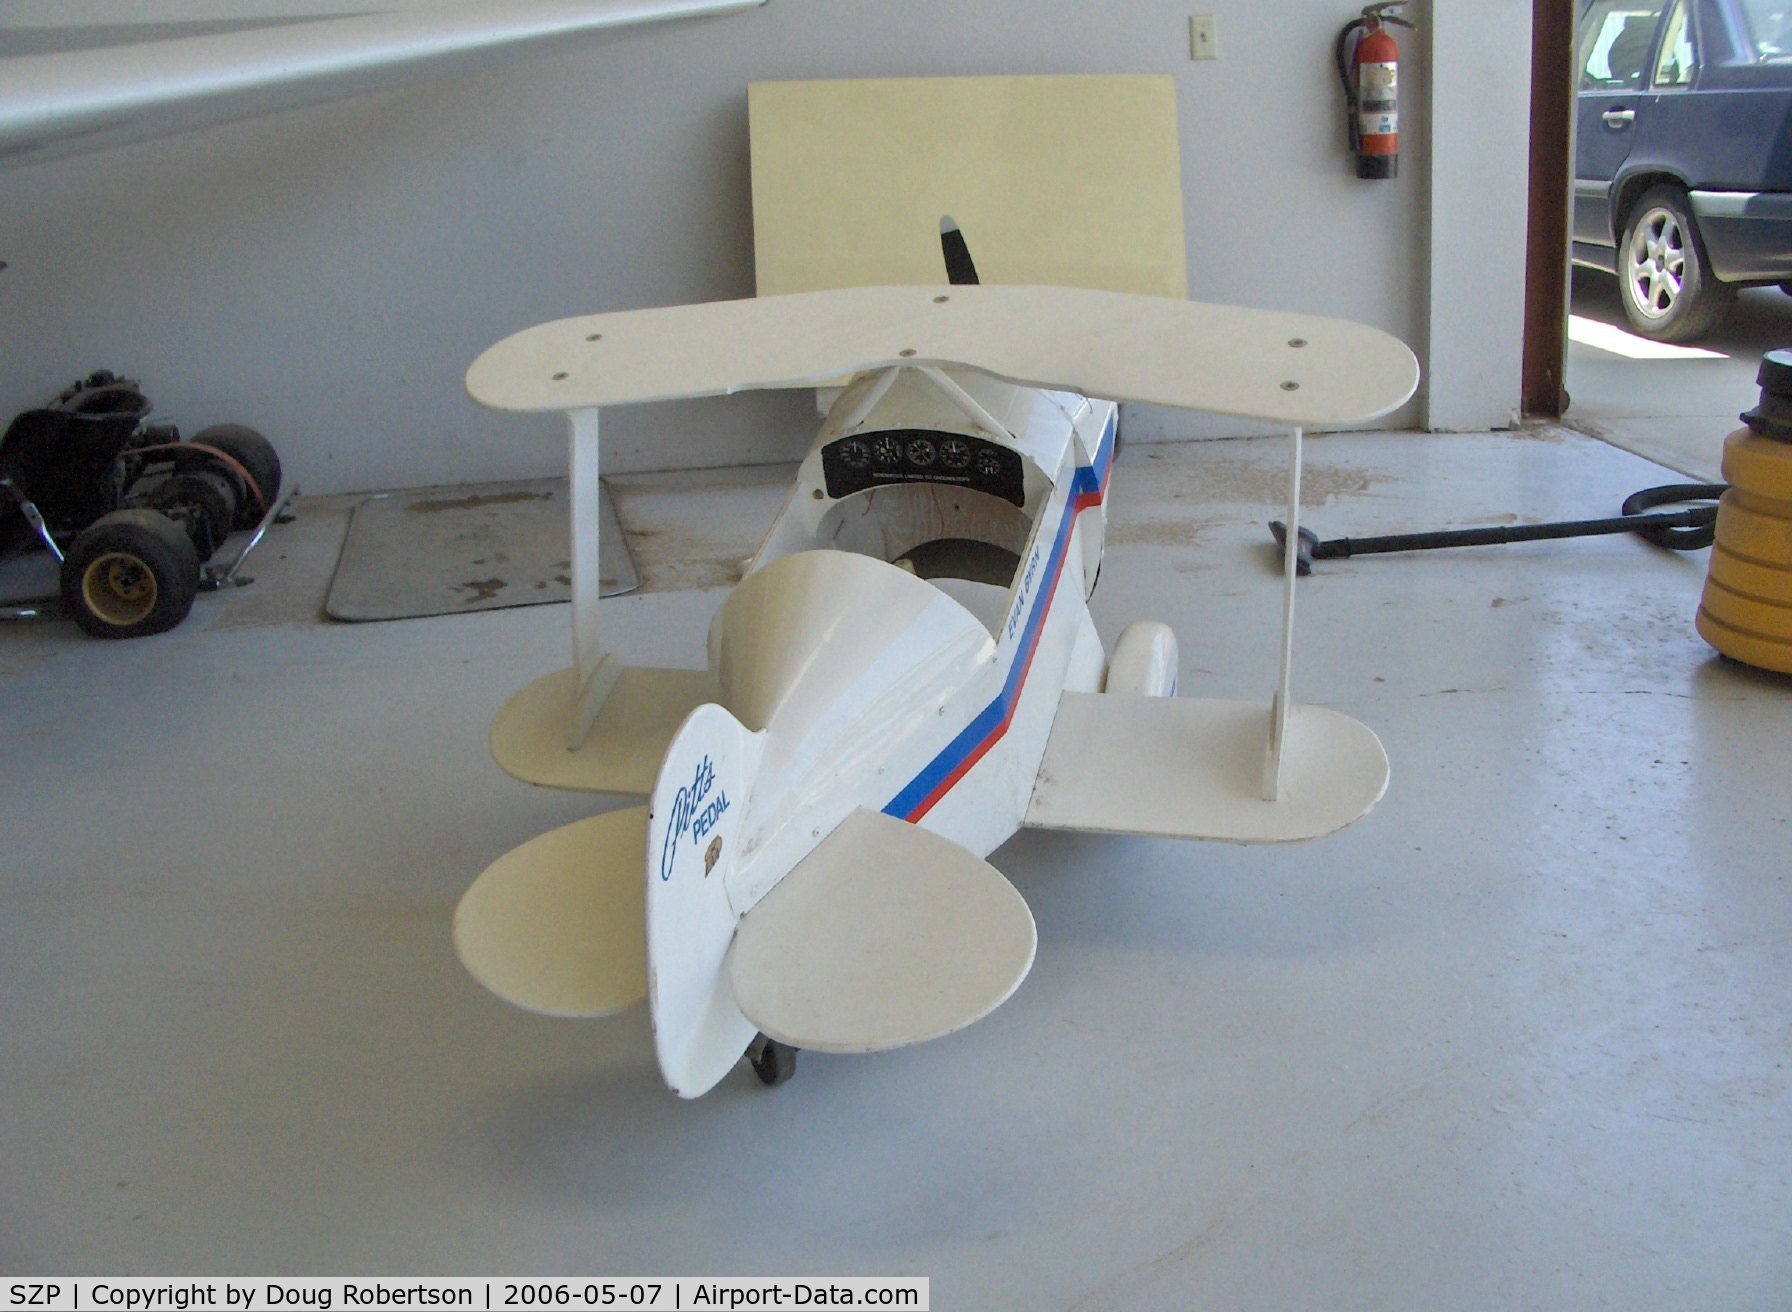 Santa Paula Airport (SZP) - PITTS Pedal 'Byrnster' biplane, full panel, steerable tail wheel, 4 year old power